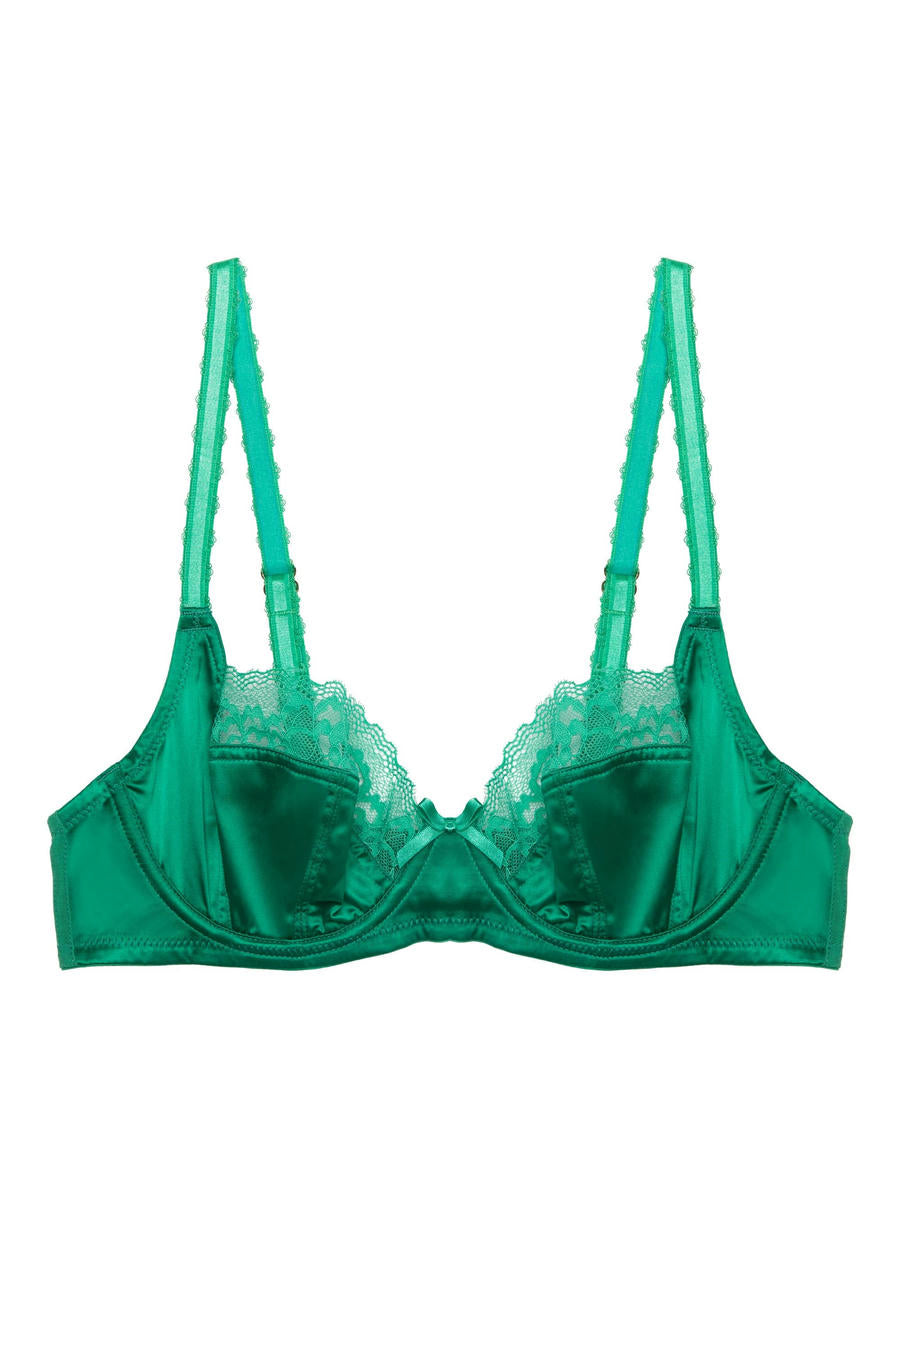 Buy A-GG Sage Green Broderie Full Cup Non Padded Bra 32C, Bras